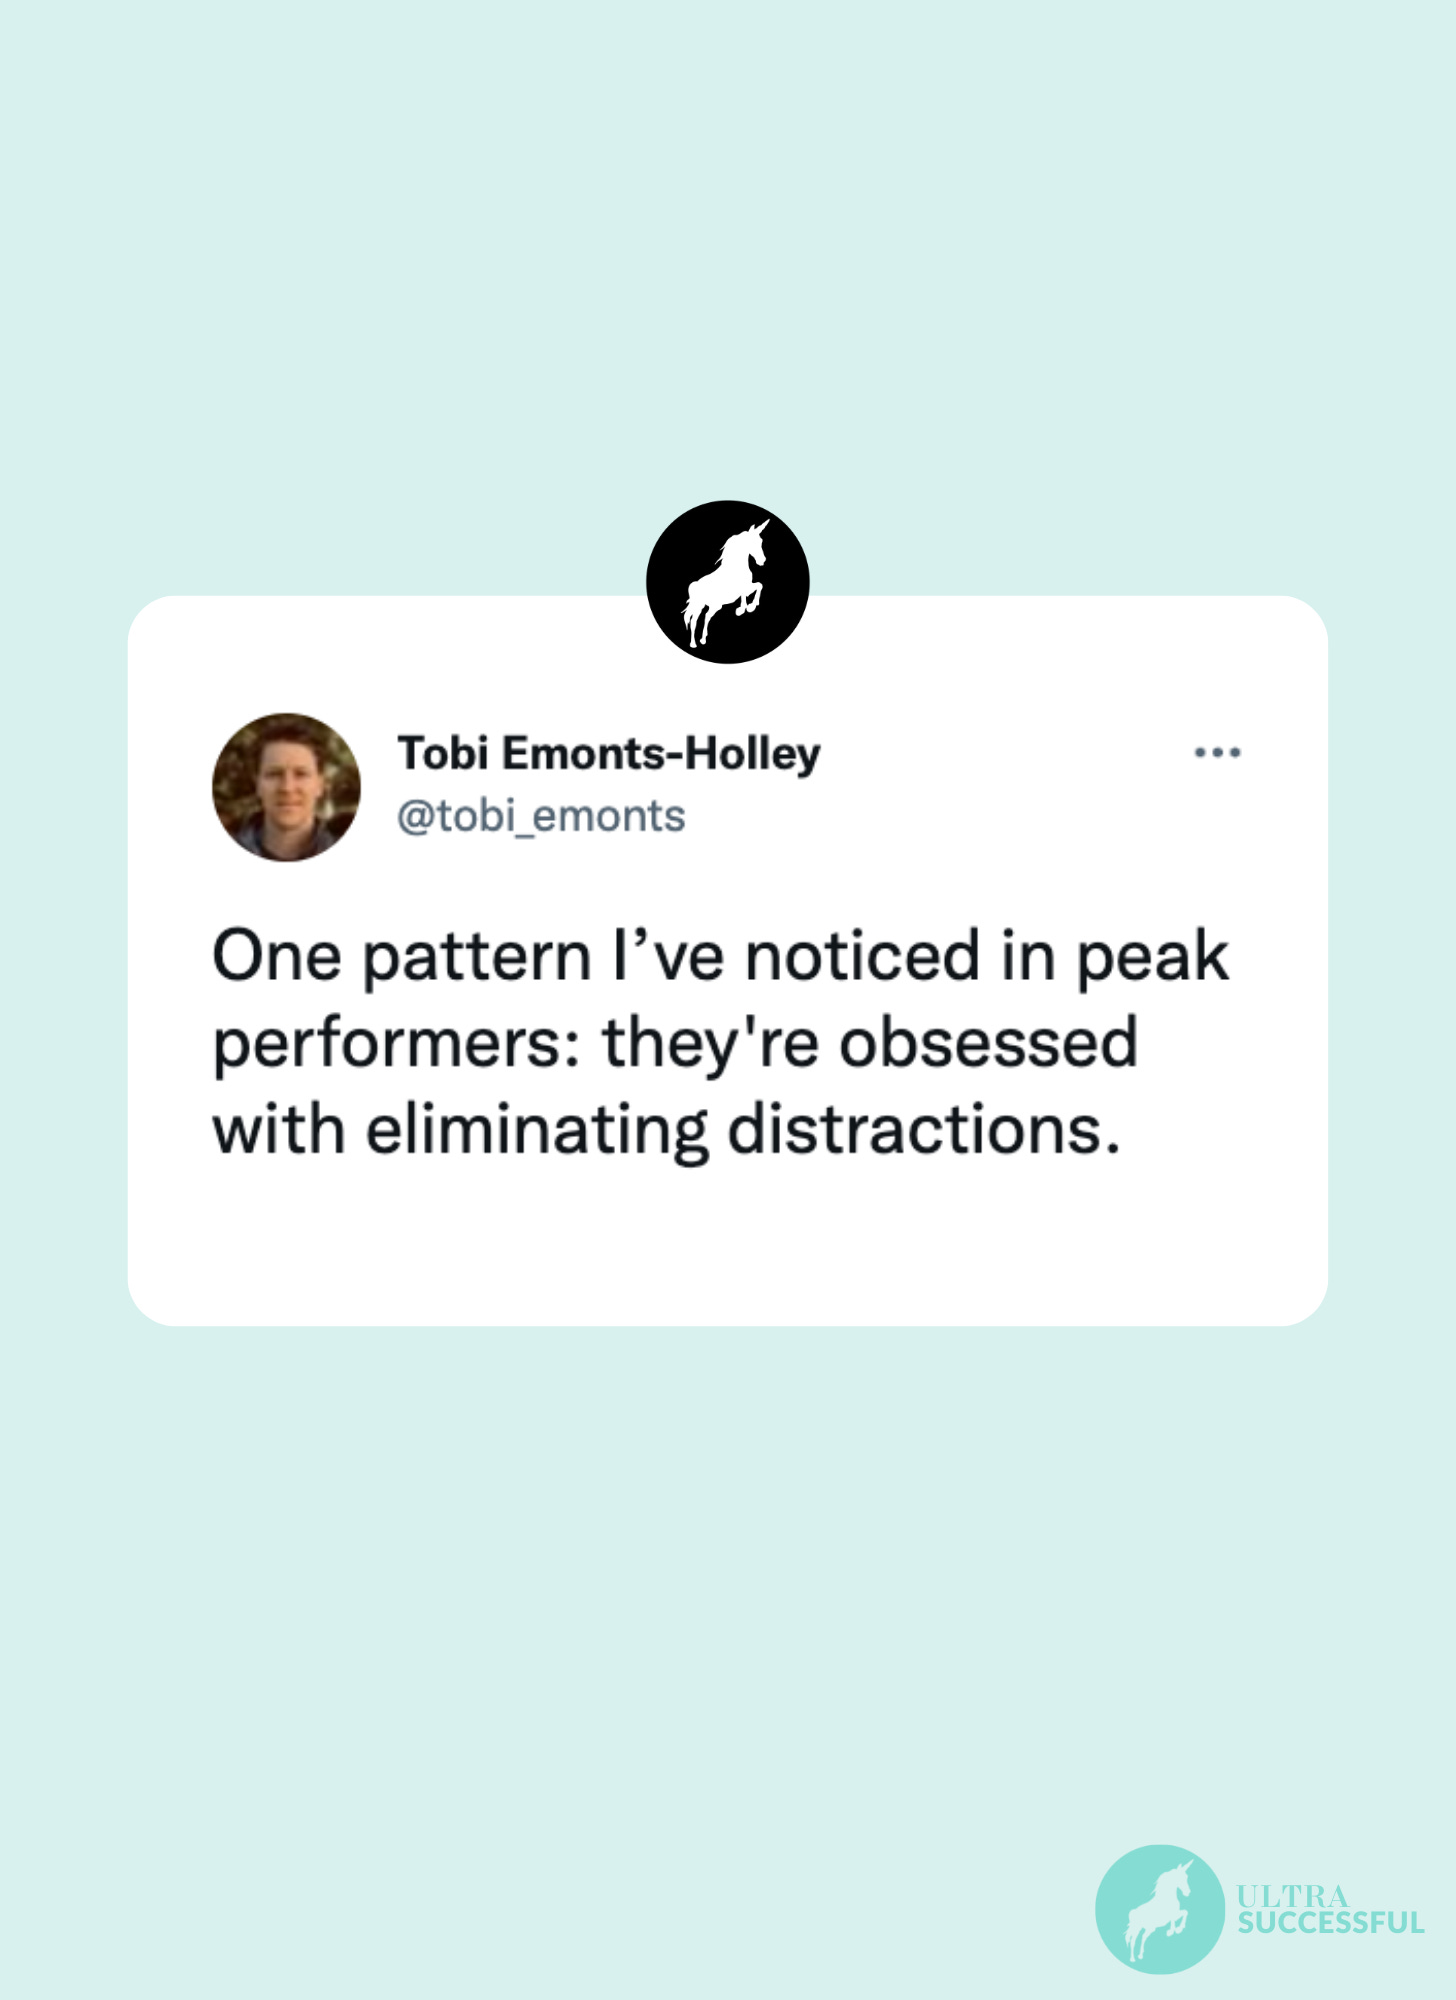 @tobi_emonts: One pattern I’ve noticed in peak performers: they're obsessed with eliminating distractions.